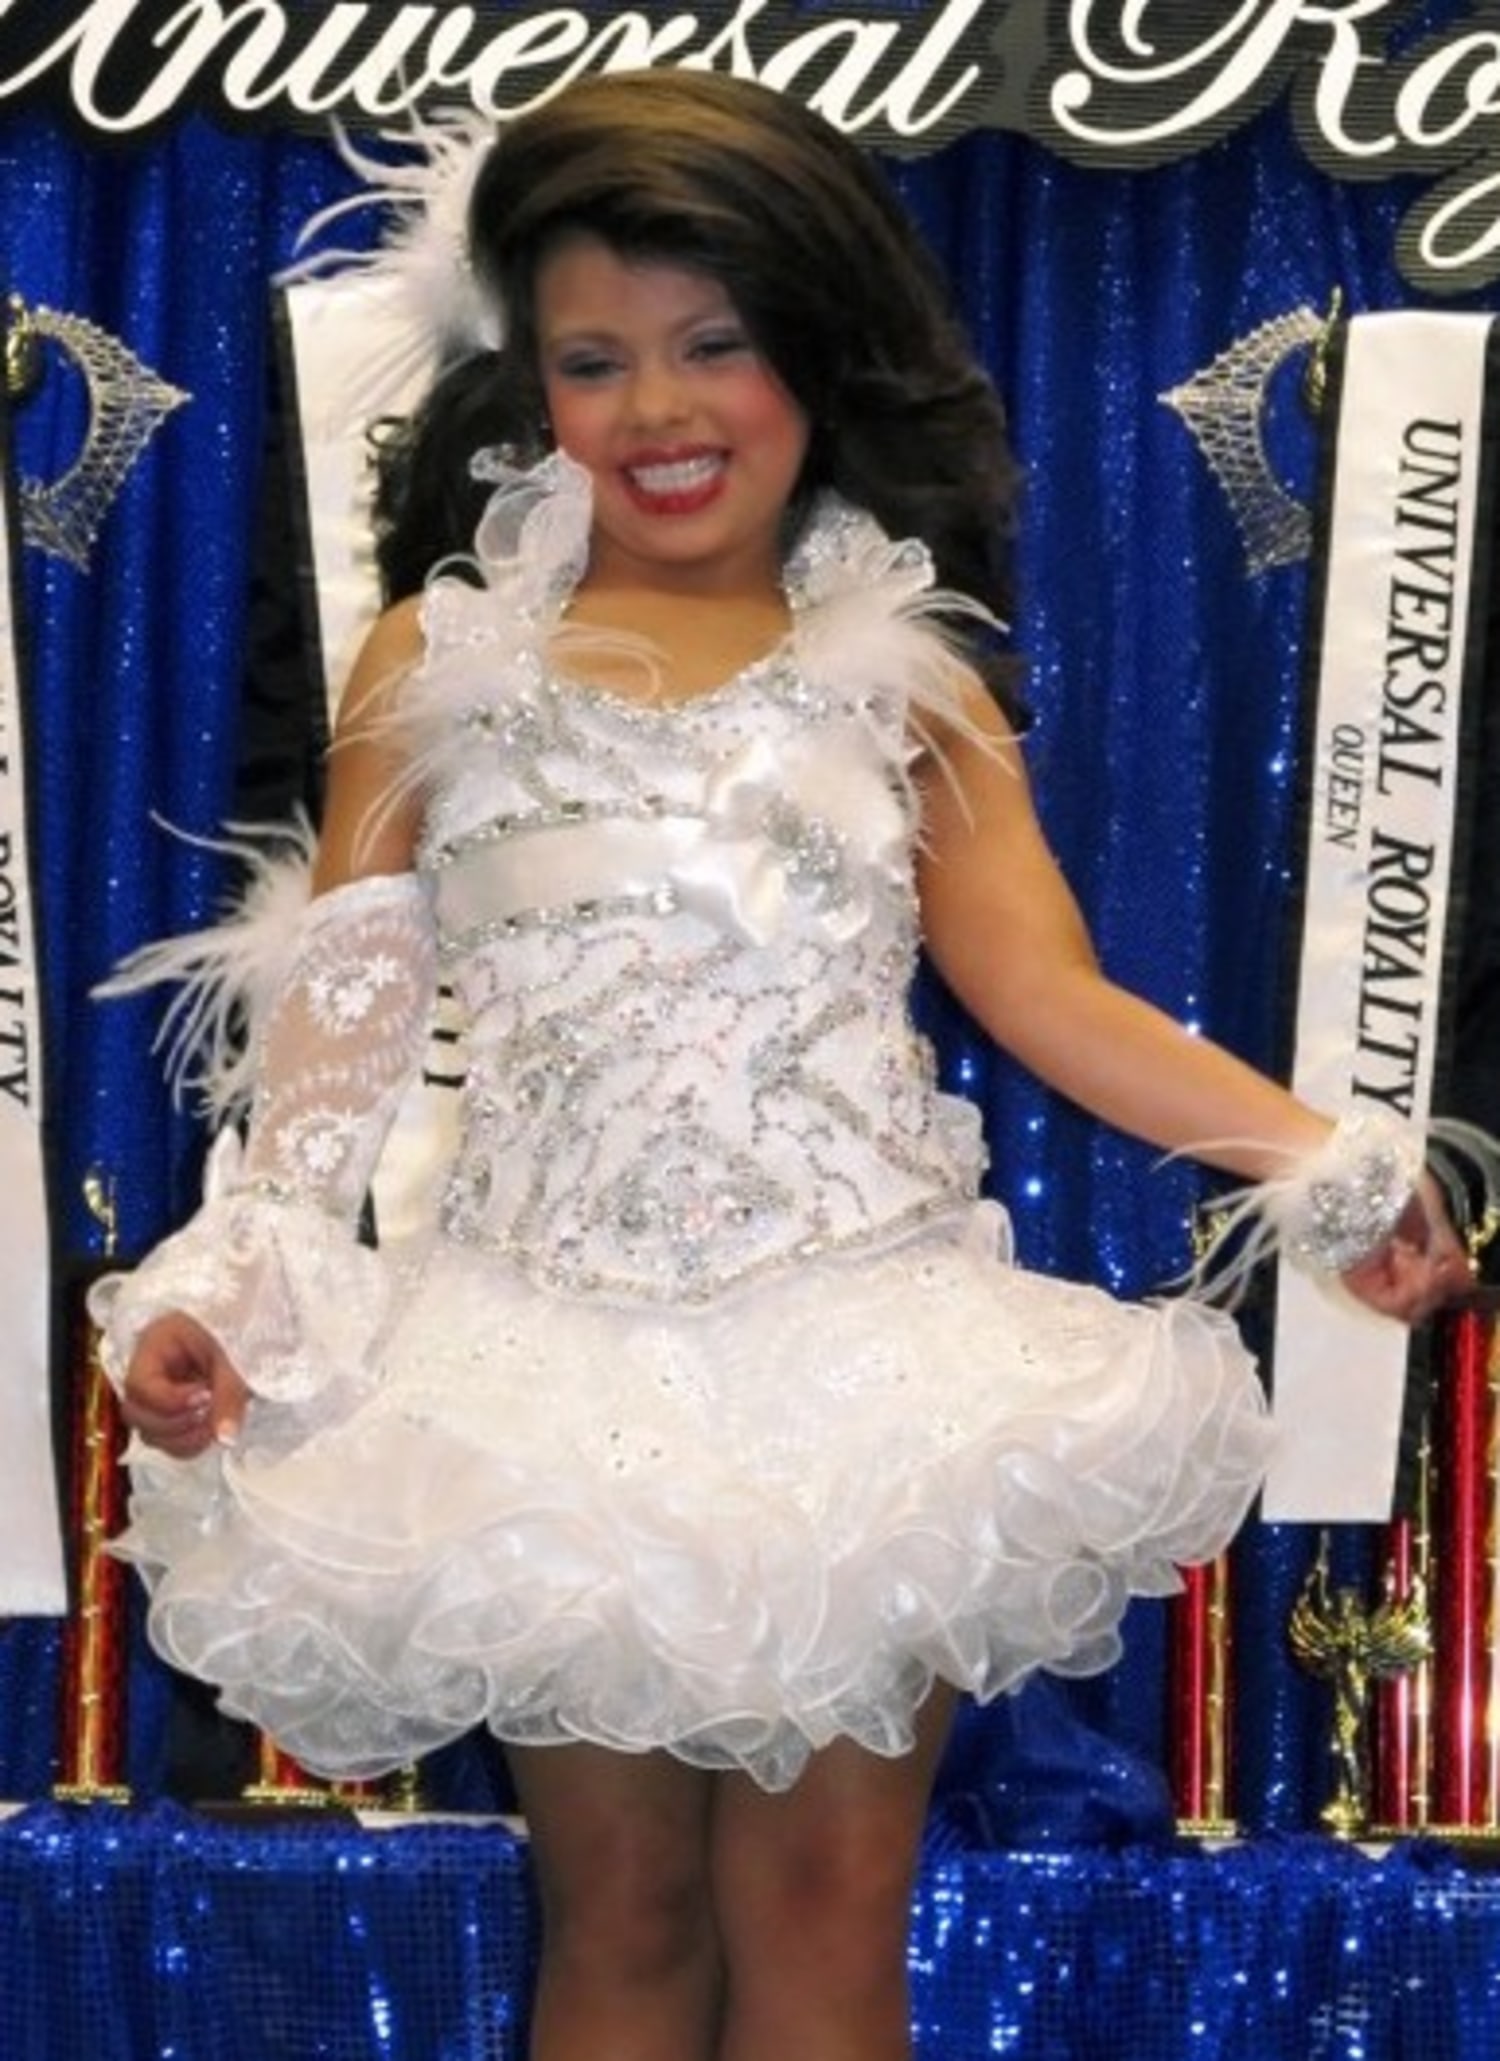 Toddlers & Tiaras' mom talks costs, passion for pageants